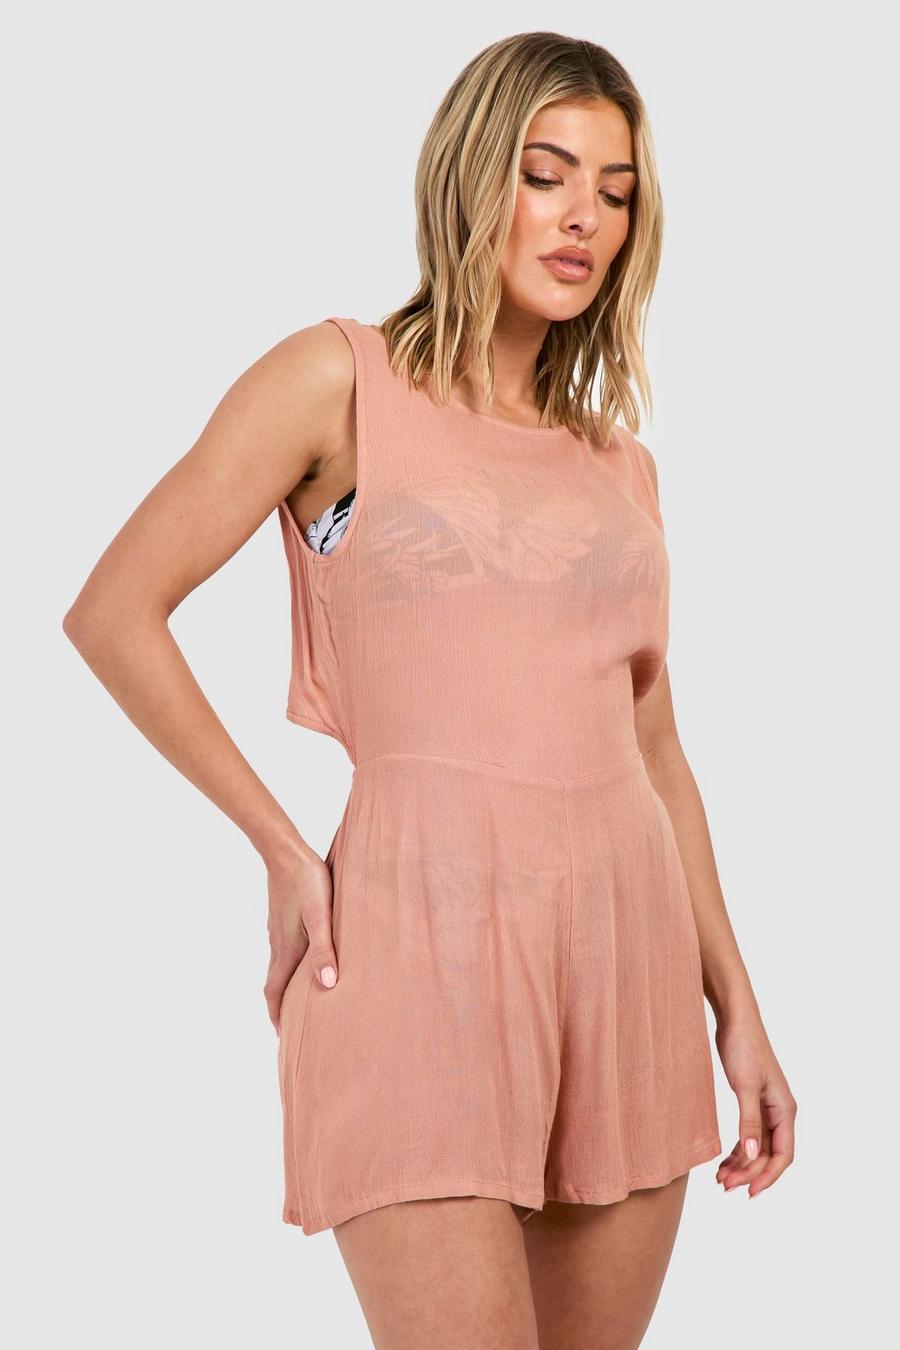 Tan Cheesecloth Tie Back Beach Playsuit